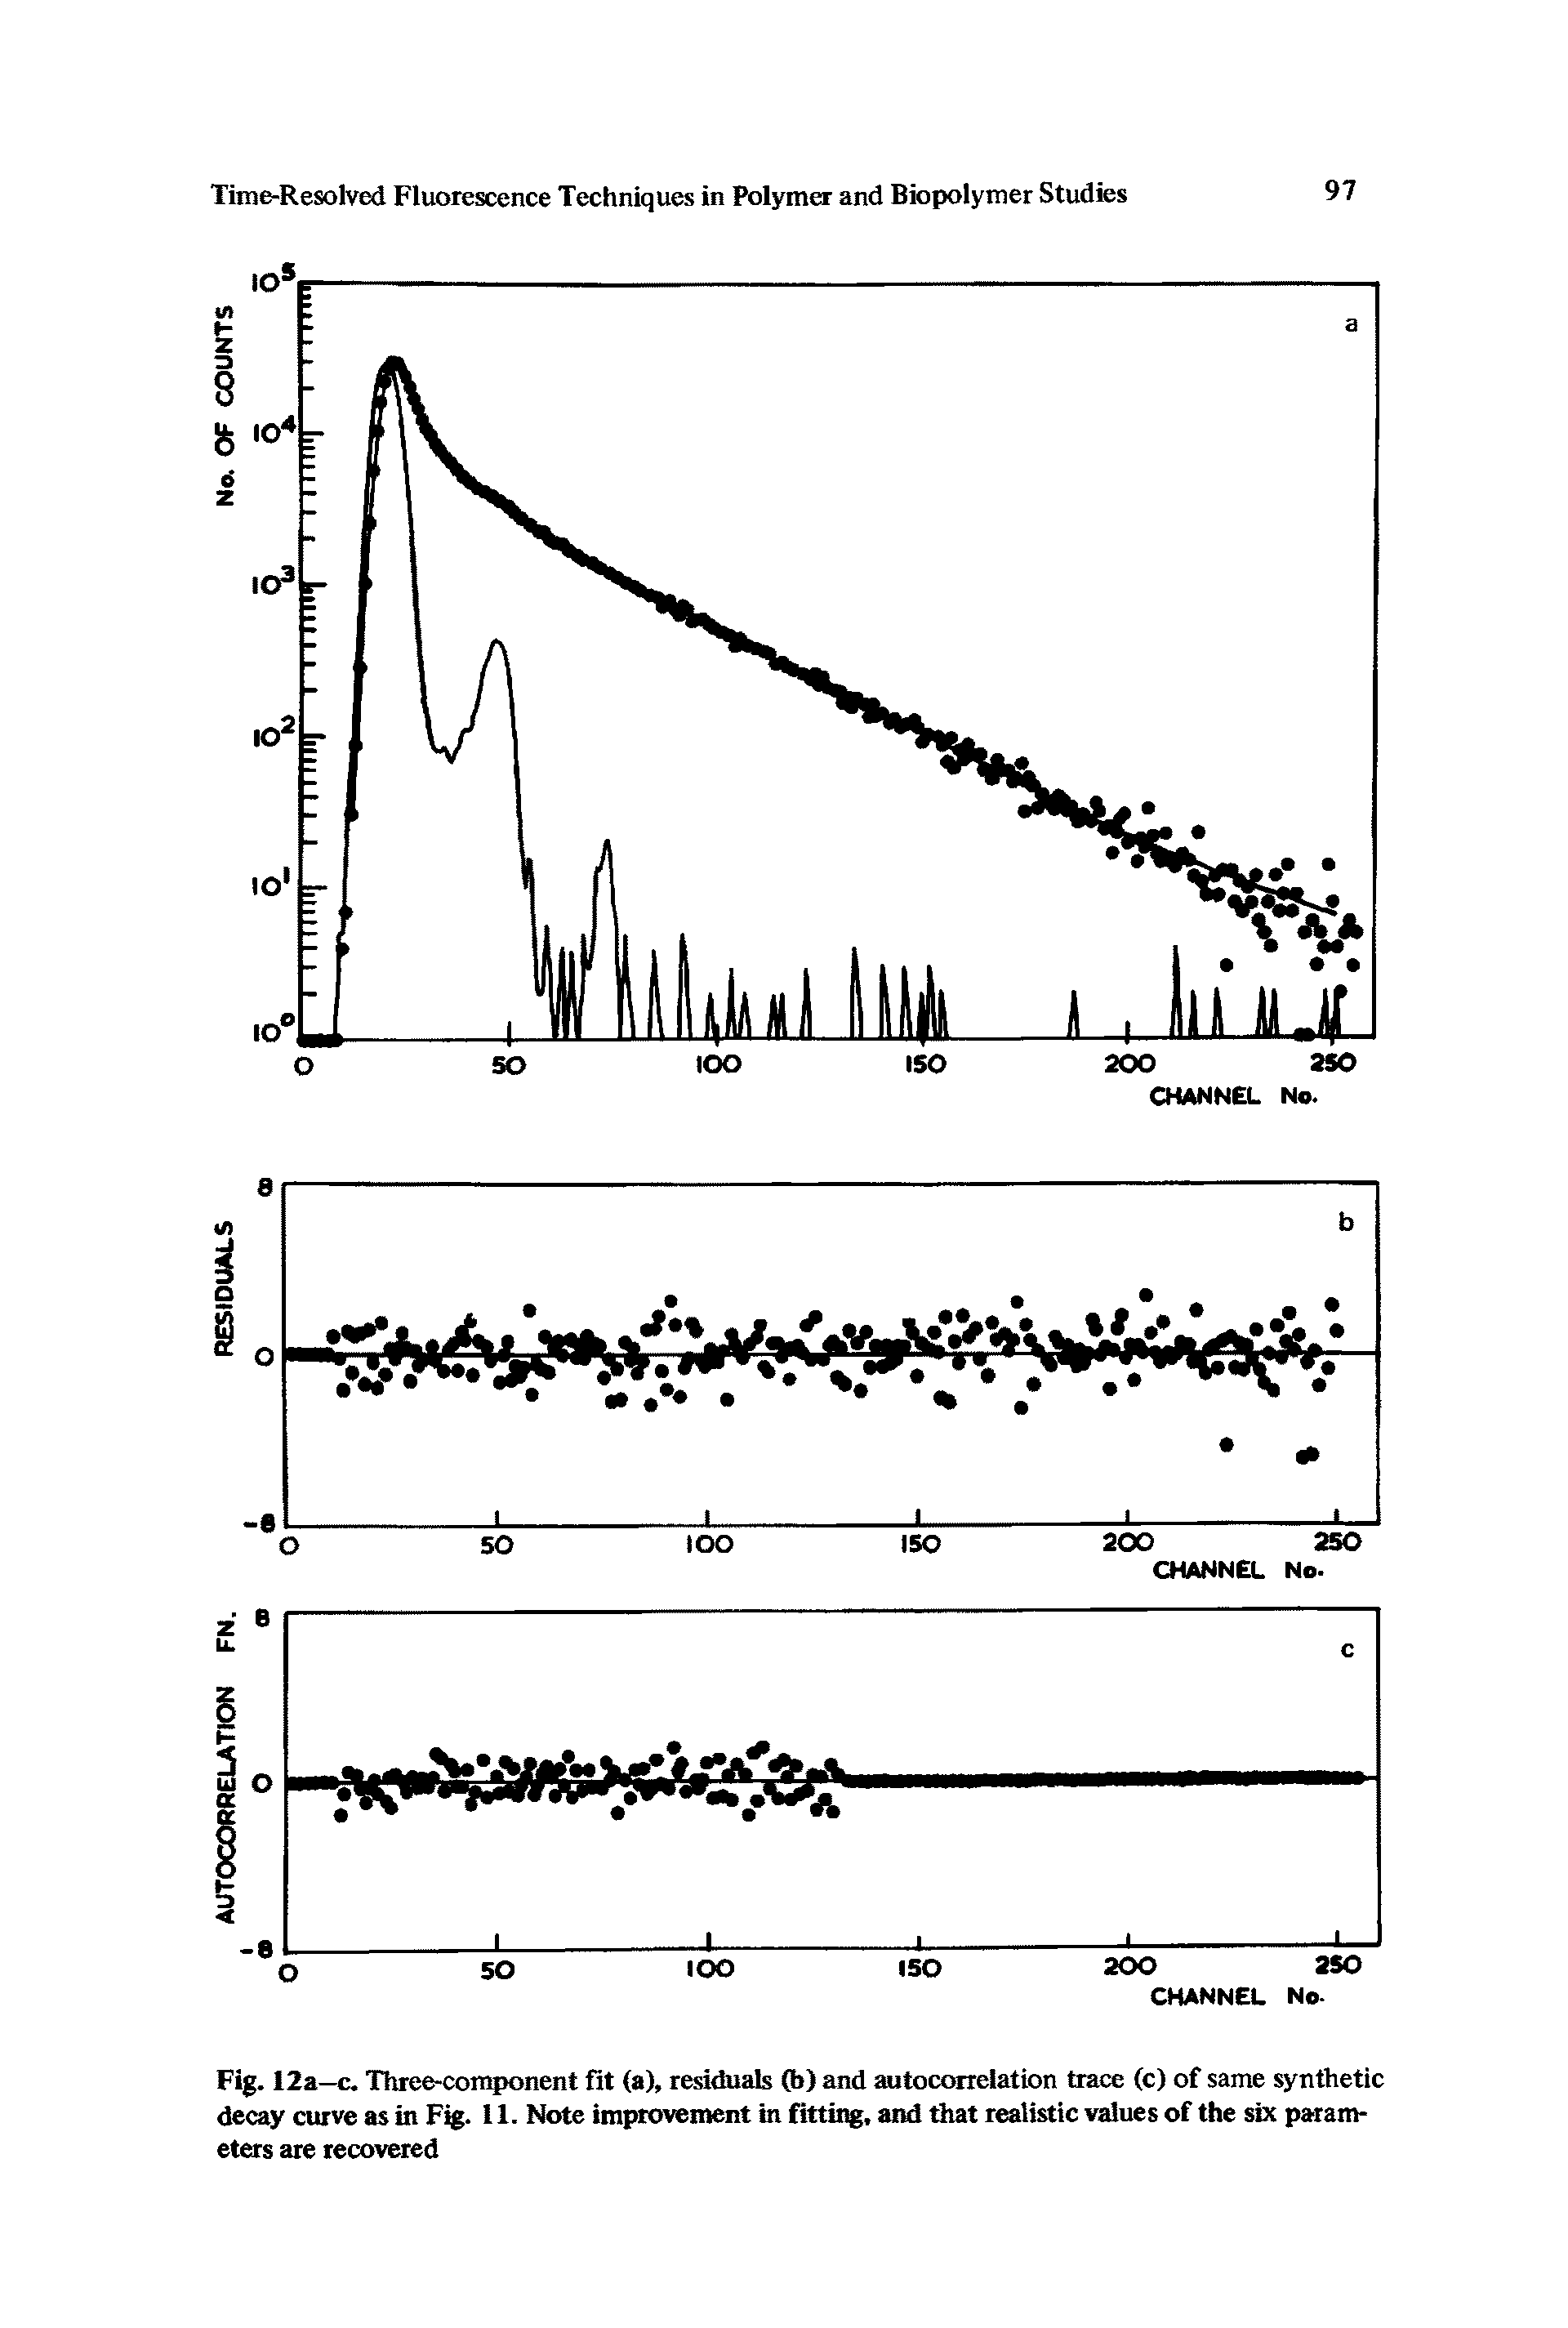 Fig. 12a—c. Three-component fit (a), residuals (b) and autocorrelation trace (c) of same synthetic decay curve as in Fig. 11. Note improvement in fittii, and that realistic values of the six parameters are recovered...